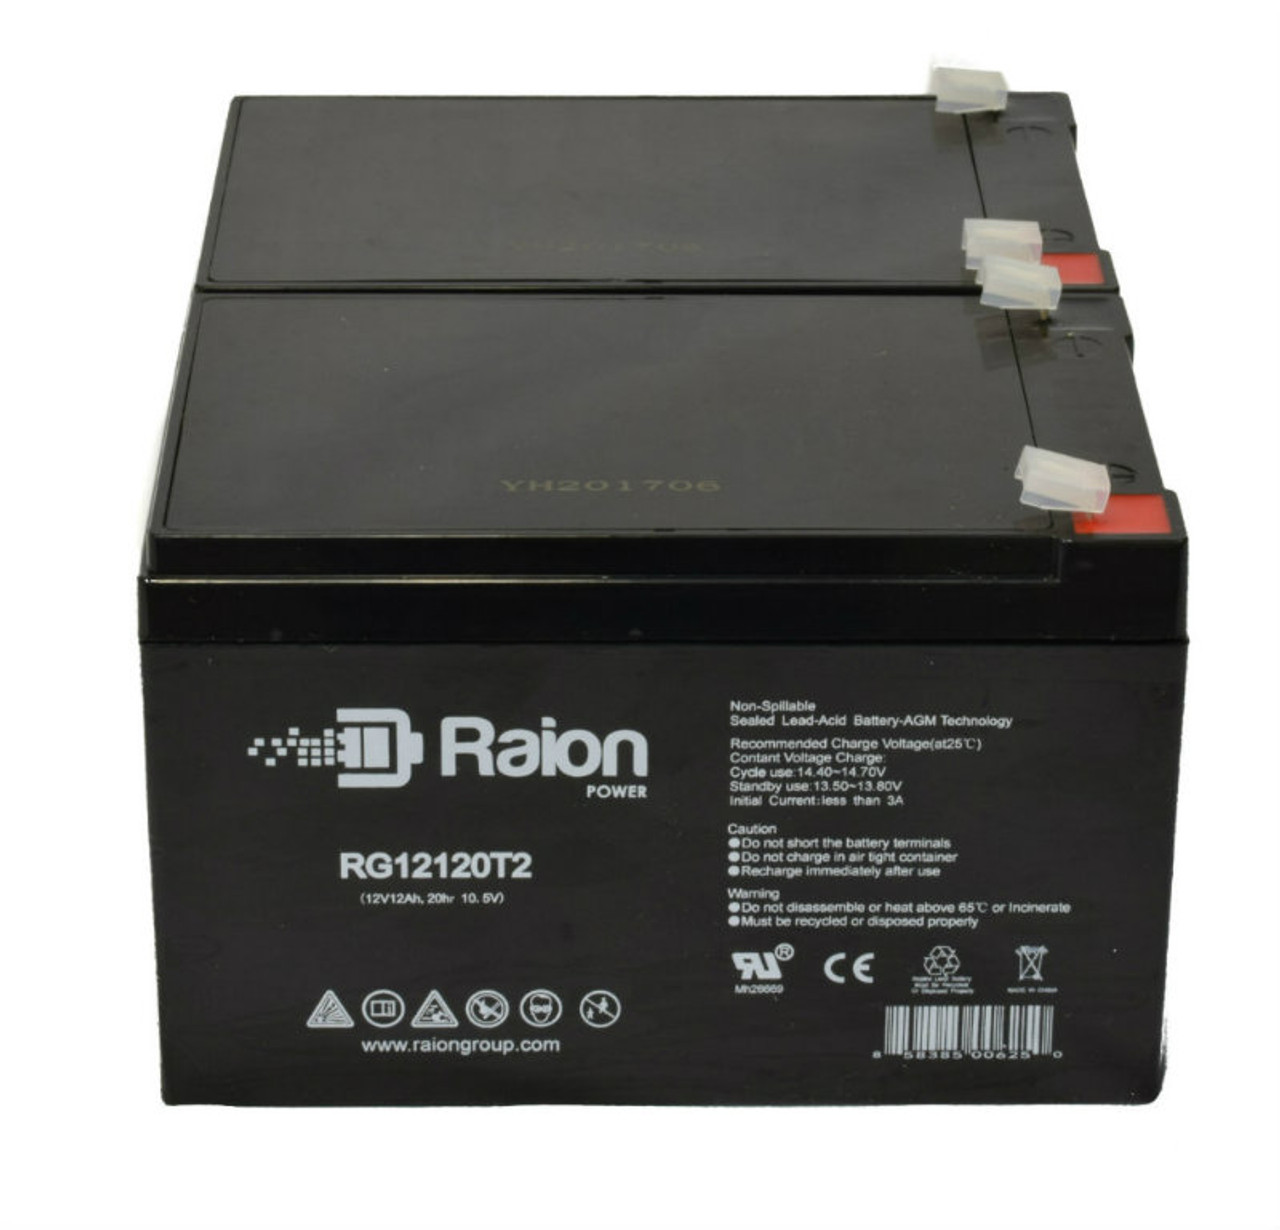 Raion Power 12V 12Ah Non-Spillable Compatible Replacement Battery for Bladez XTR Street - (2 Pack)